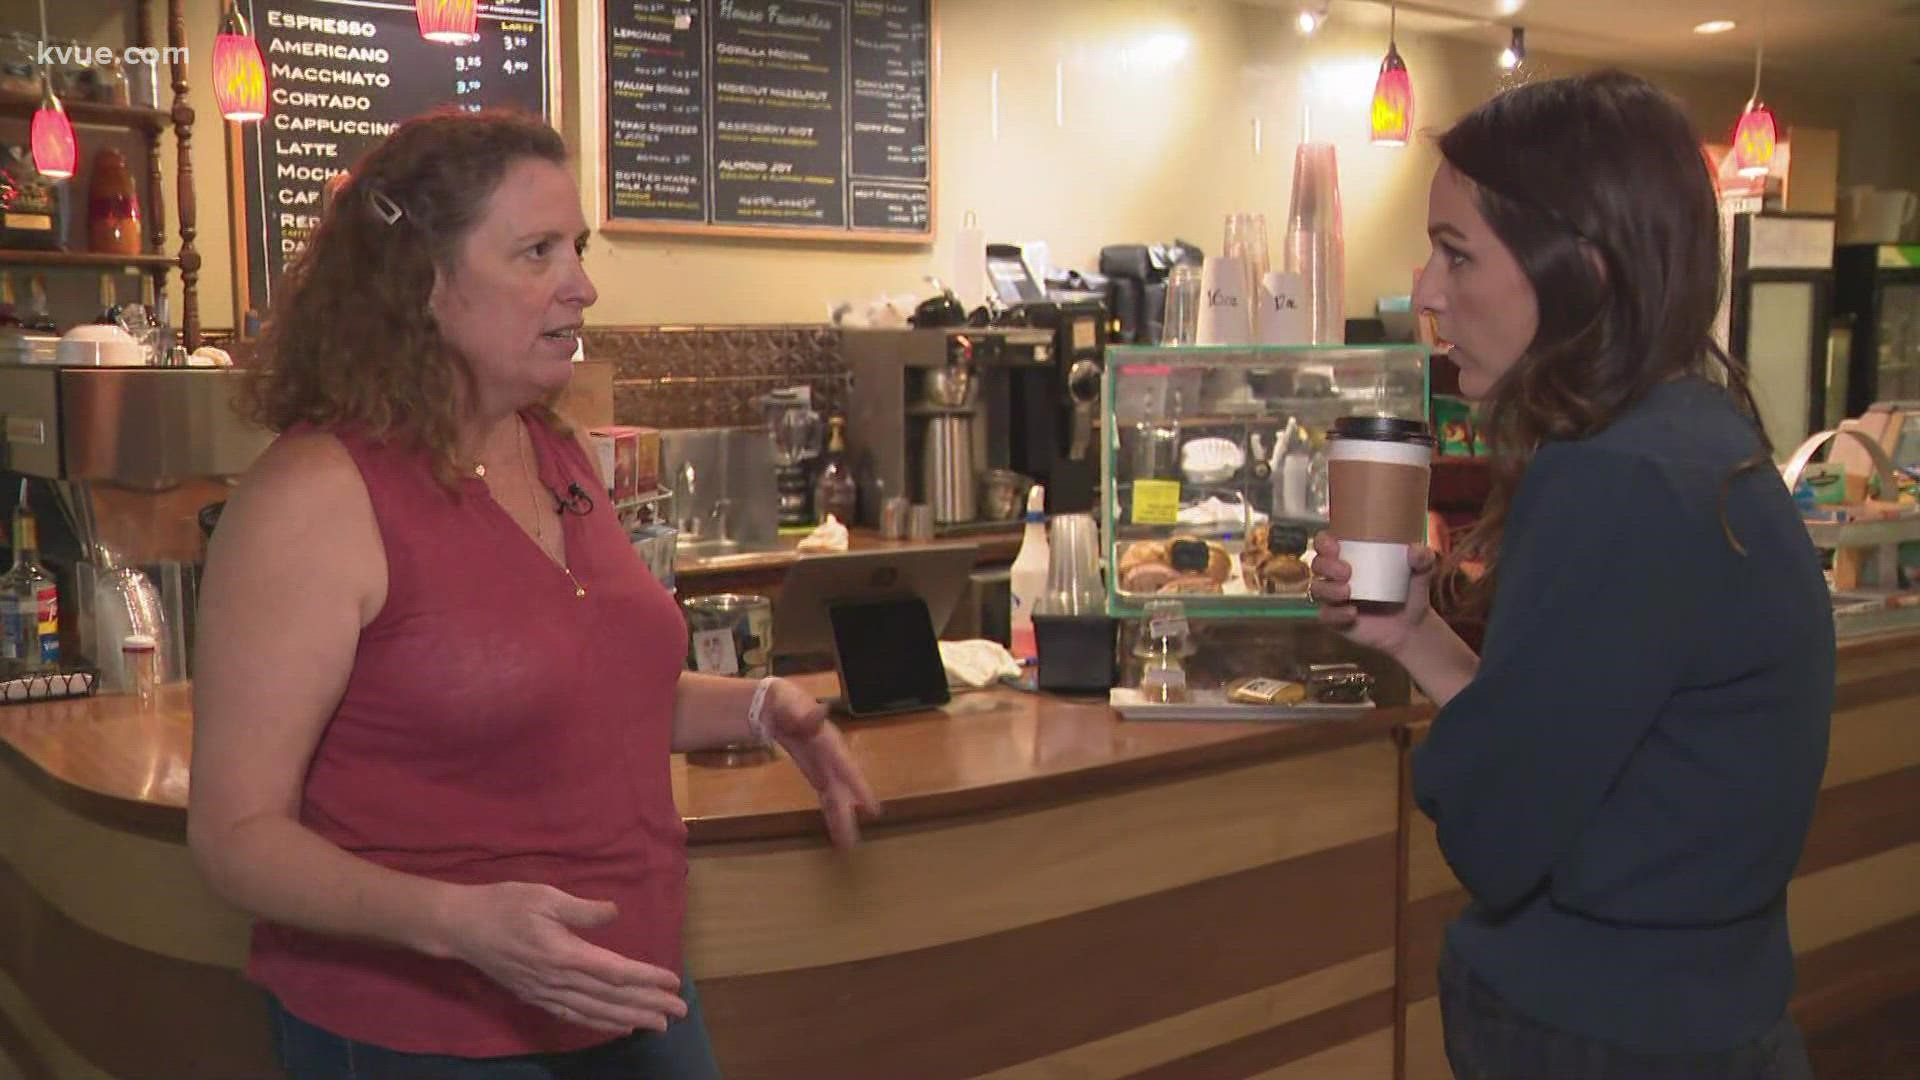 For this edition of Keep Austin Local, KVUE visits The Hideout Theatre. The Coffee House at the venue also serves beer and wine.